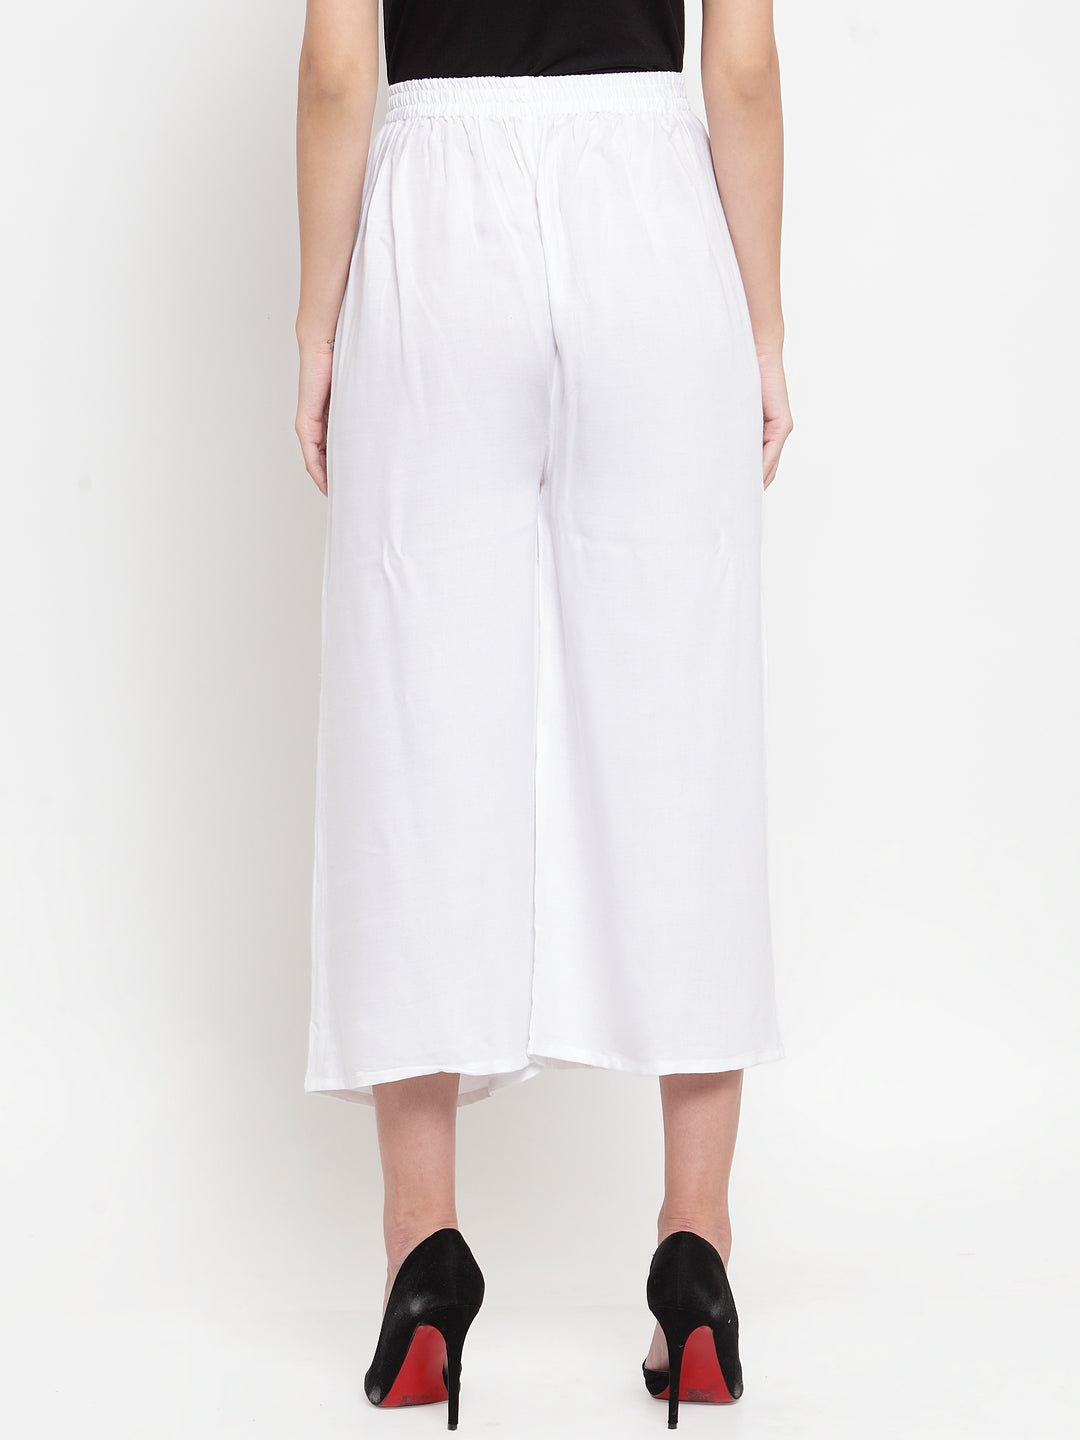 Women's White Solid Rayon Culottes - Wahe-NOOR